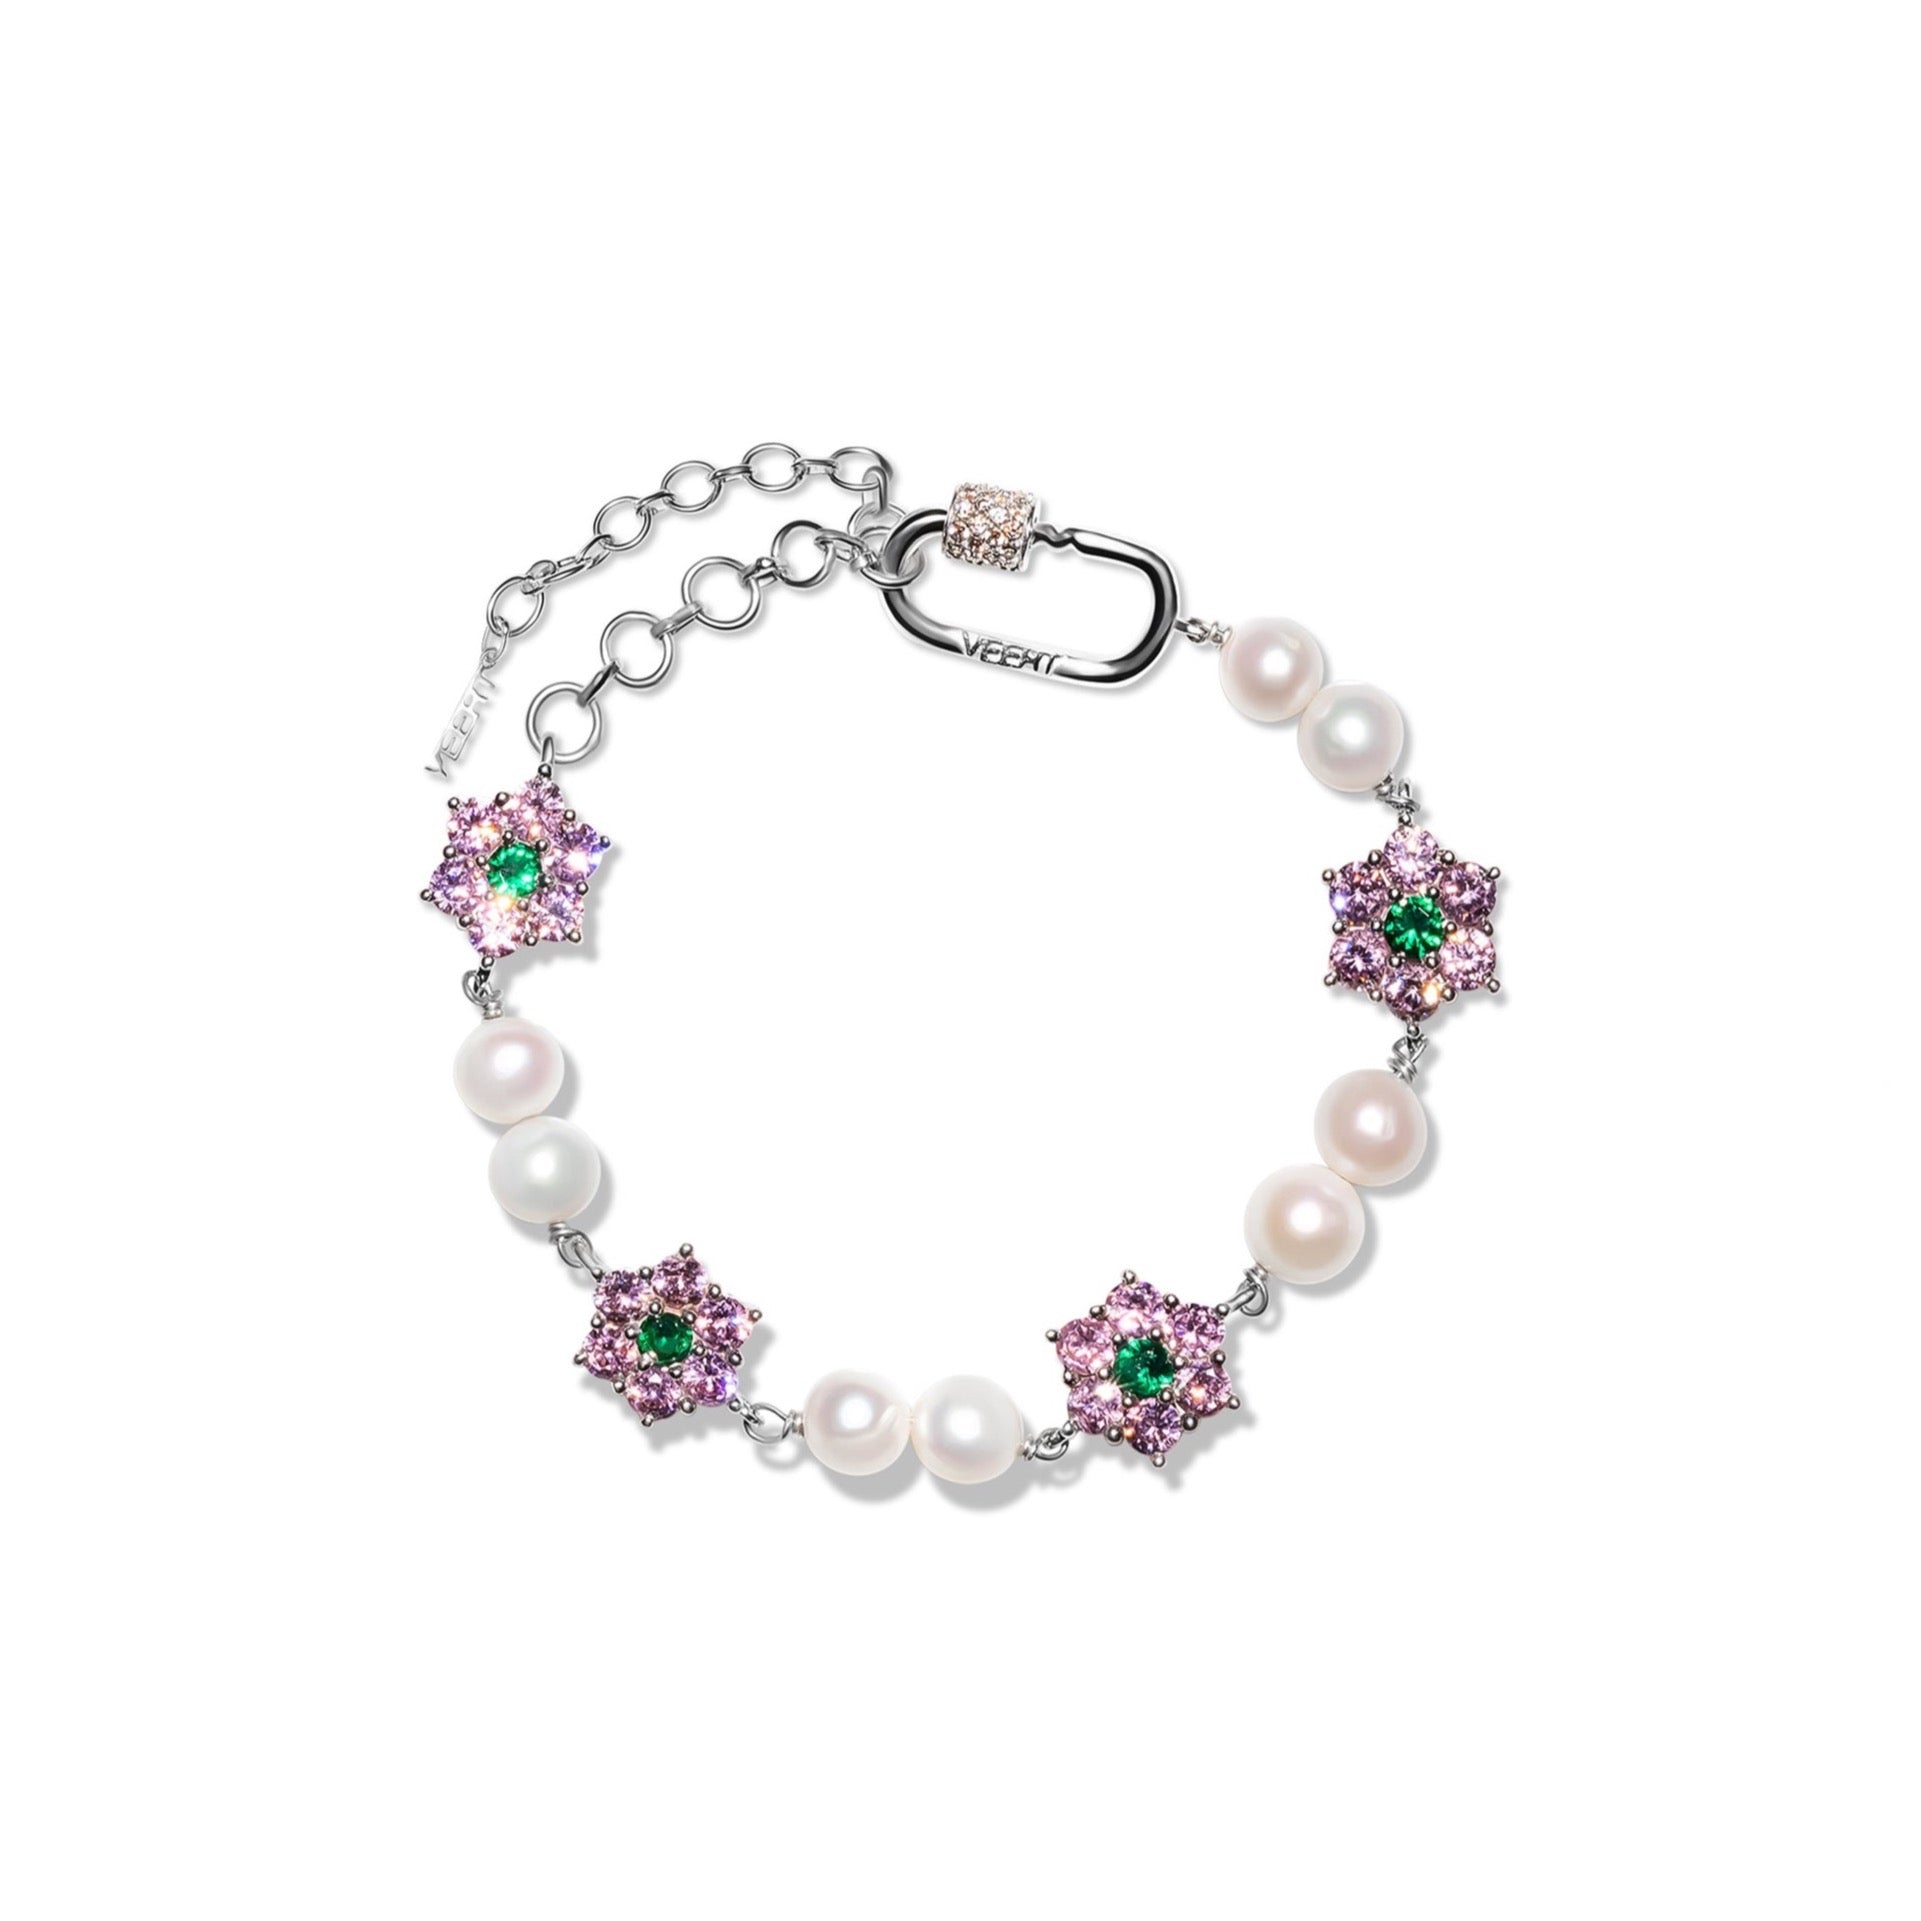 The New flower bracelet with pink cherry blossom green pearl small pure and fresh and heartly sweet